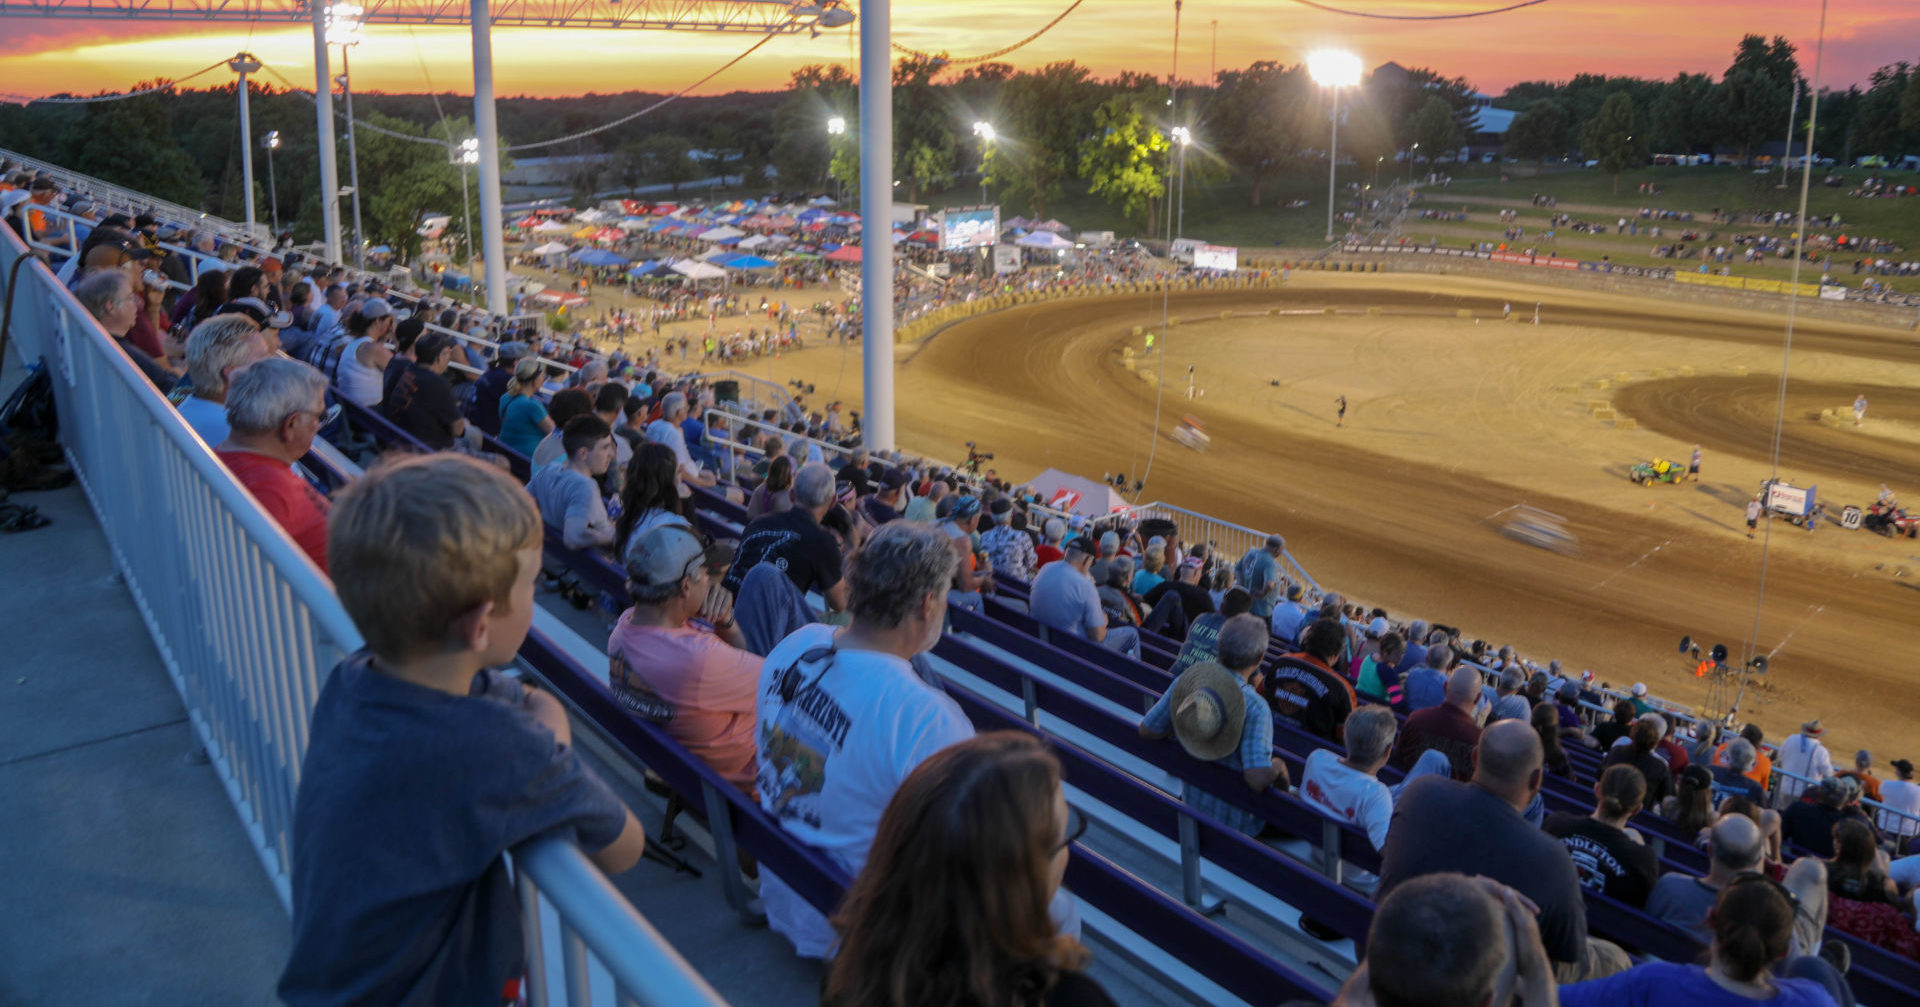 The view from the main grandstands at the Springfield Short Track in 2018. Photo by Scott Hunter, courtesy AFT.